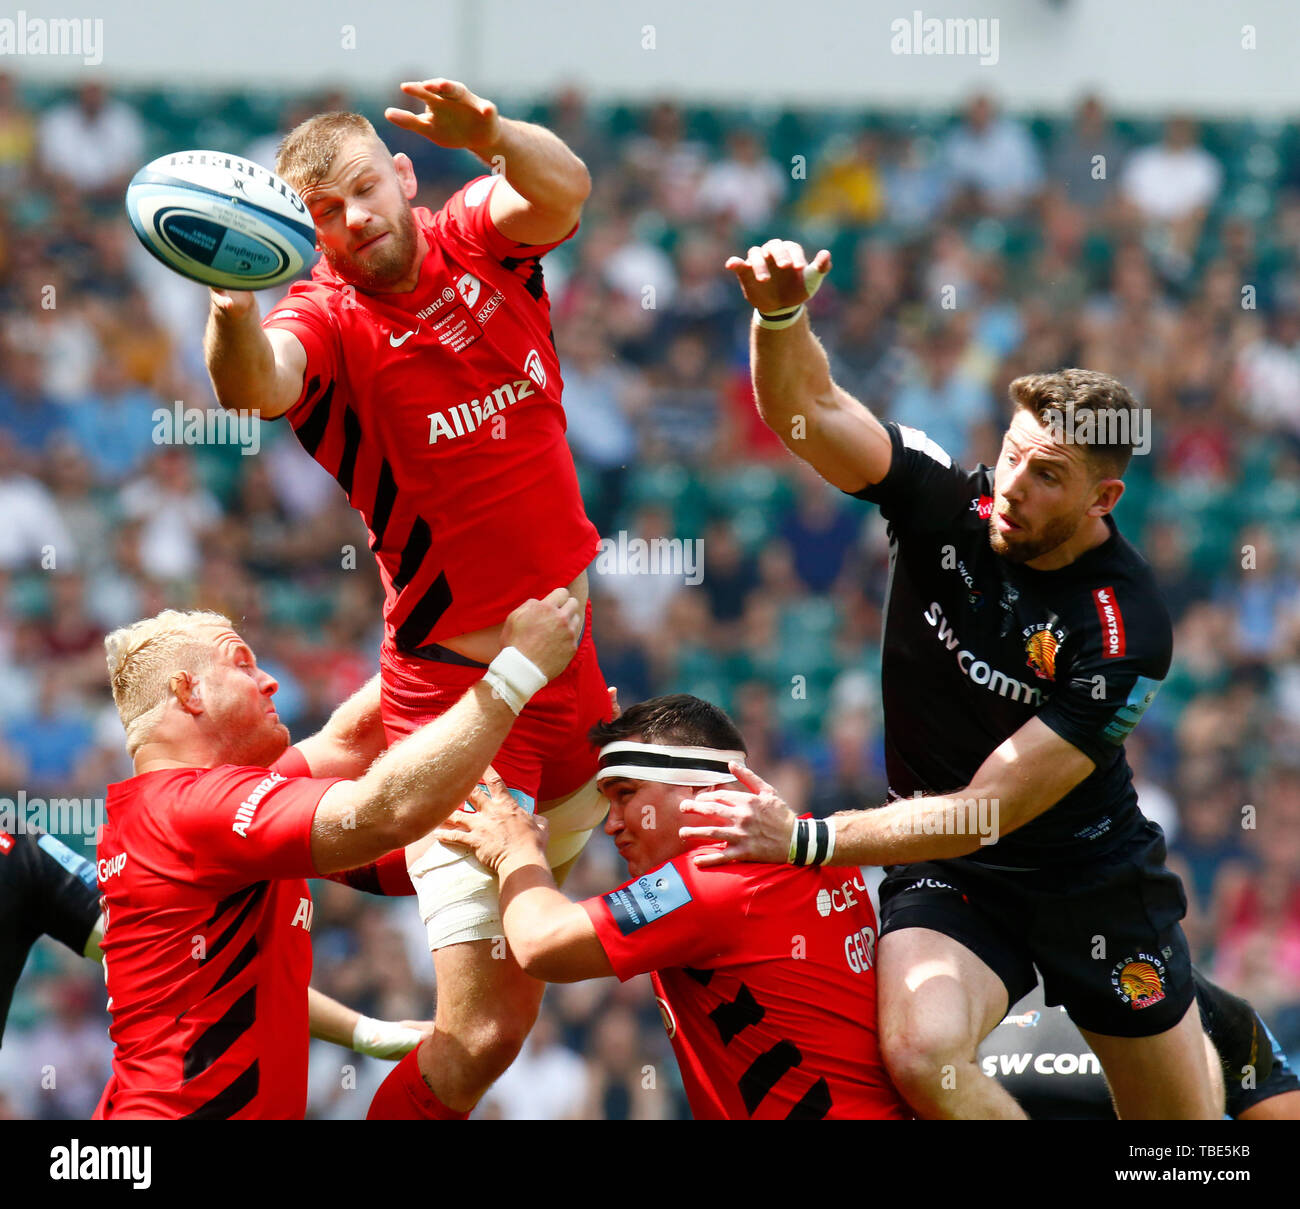 LONDON, United Kingdom. 01st June, 2019. George Kruis of Saracens during Gallagher Premiership Rugby Final between Exeter Chiefs and Saracens at Twickenham Stadium, London, on 01 June 2019 Credit: Action Foto Sport/Alamy Live News Stock Photo